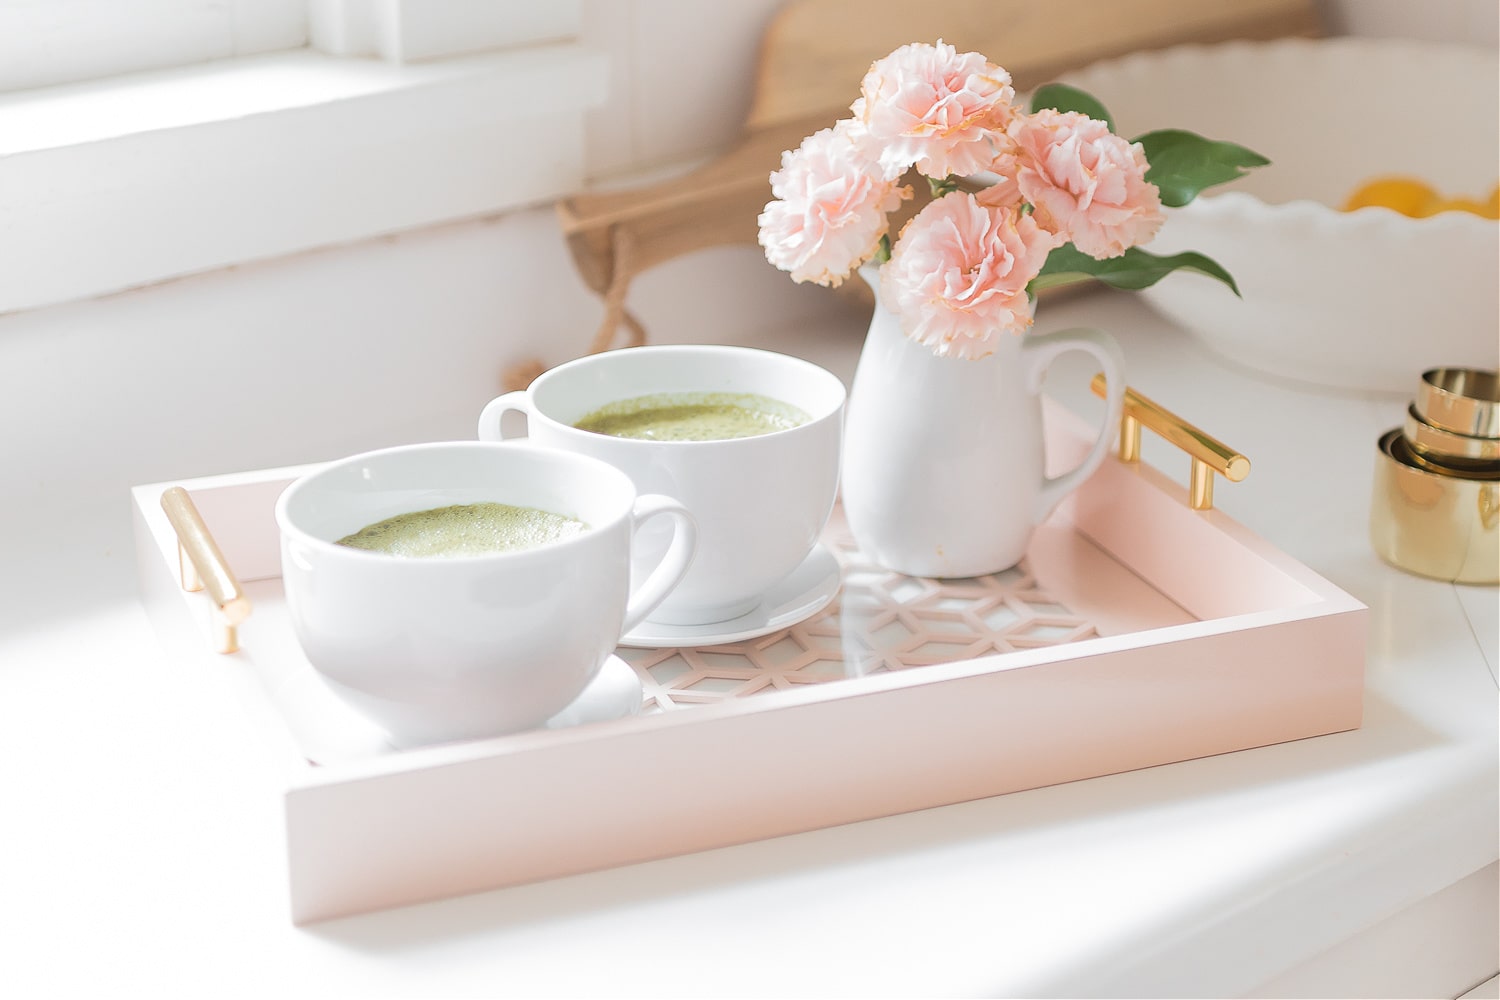 Blogger Stephanie Ziajka shows how to make a matcha latte at home on Diary of a Debutante